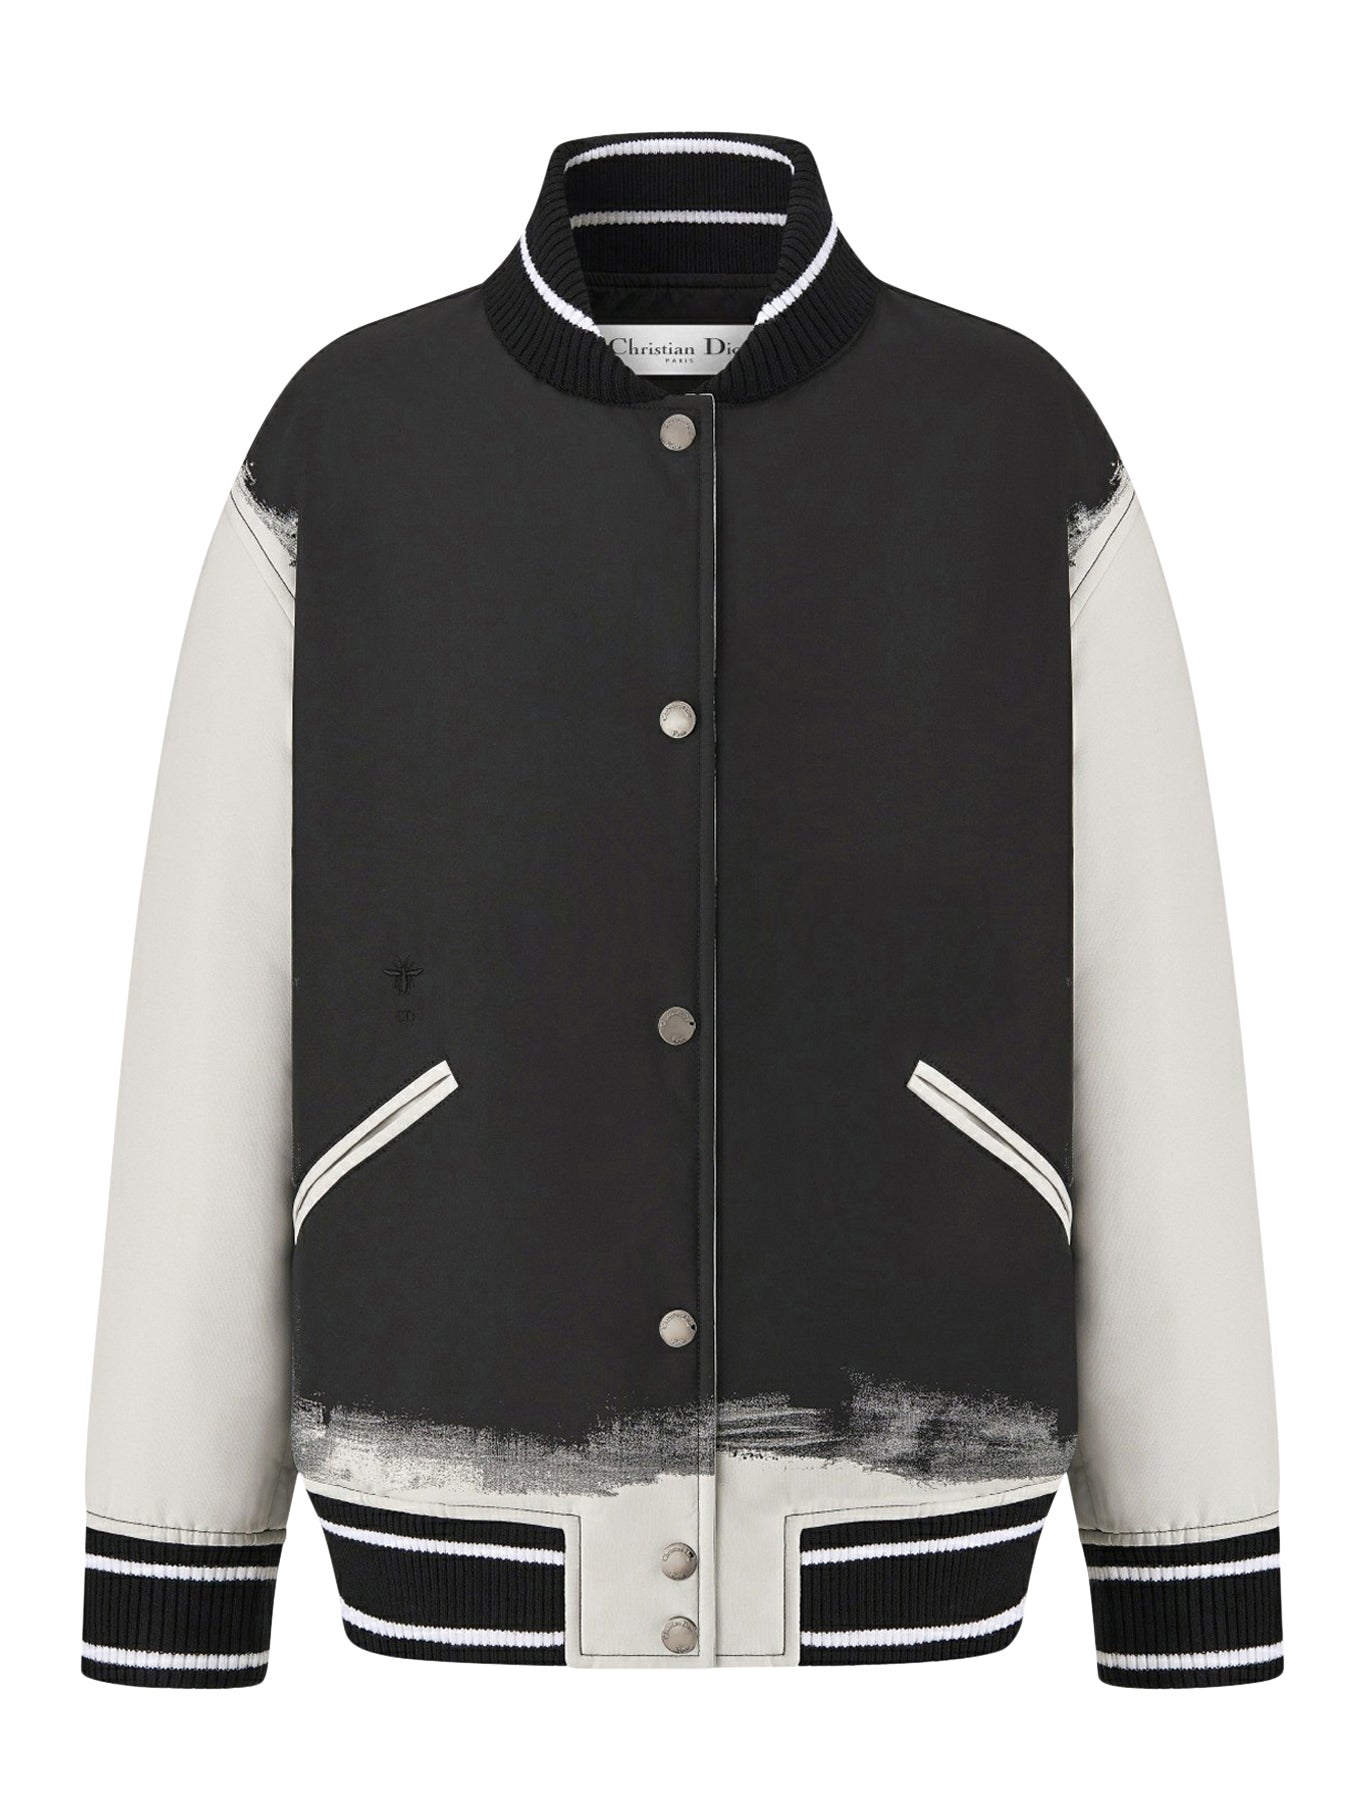 Bomber jacket in black and white technical taffeta jacquard with New York motif